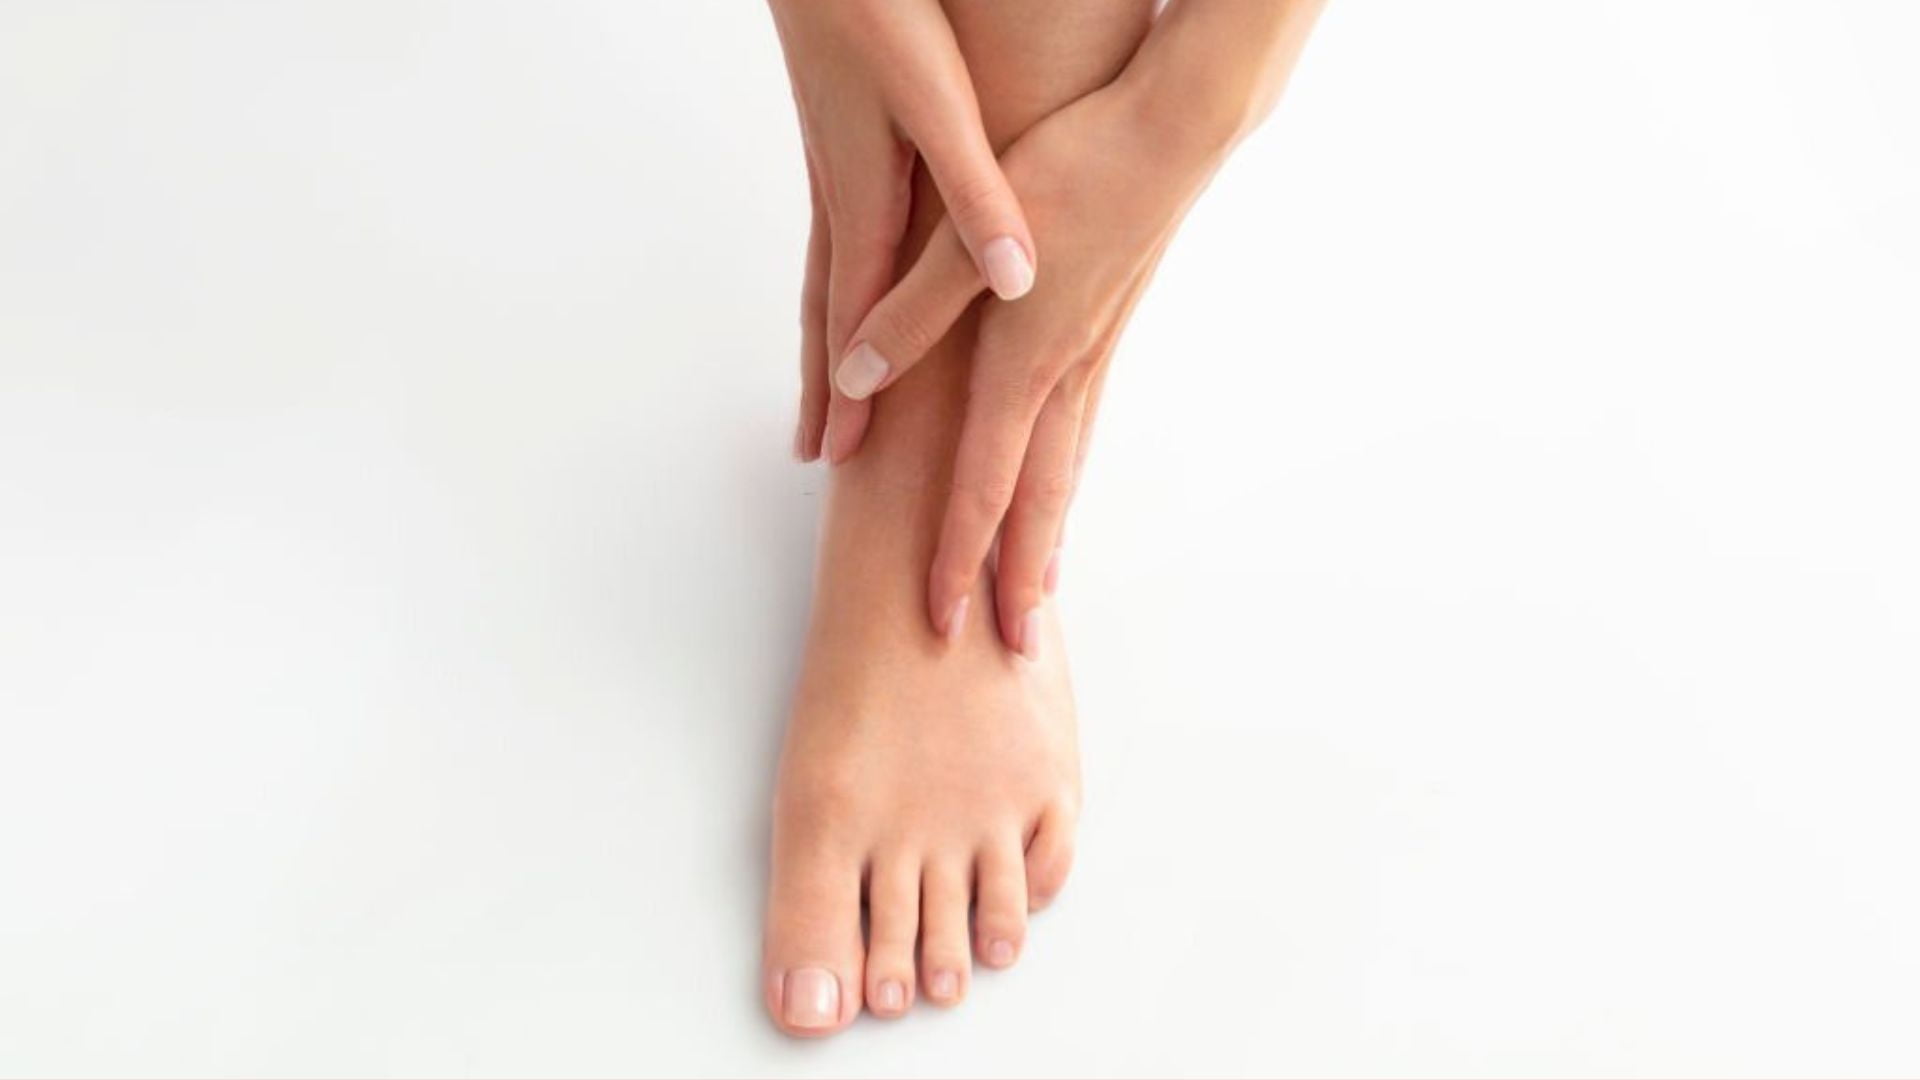 Lapiplasty Bunion Surgery Pros And Cons